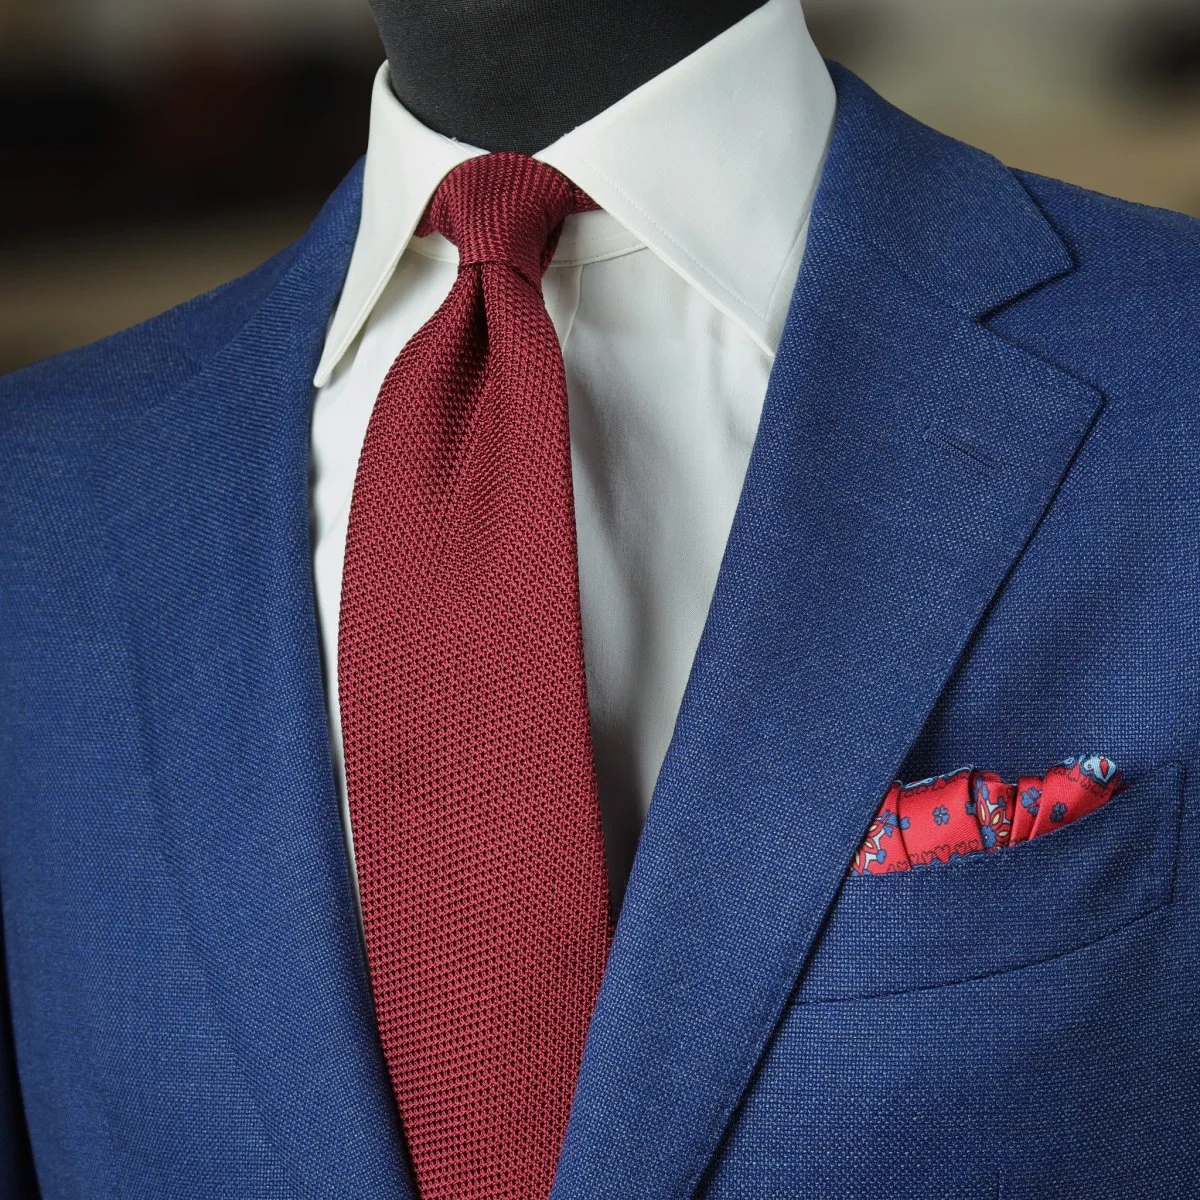 Blue suit, white shirt and red grenadine tie combination